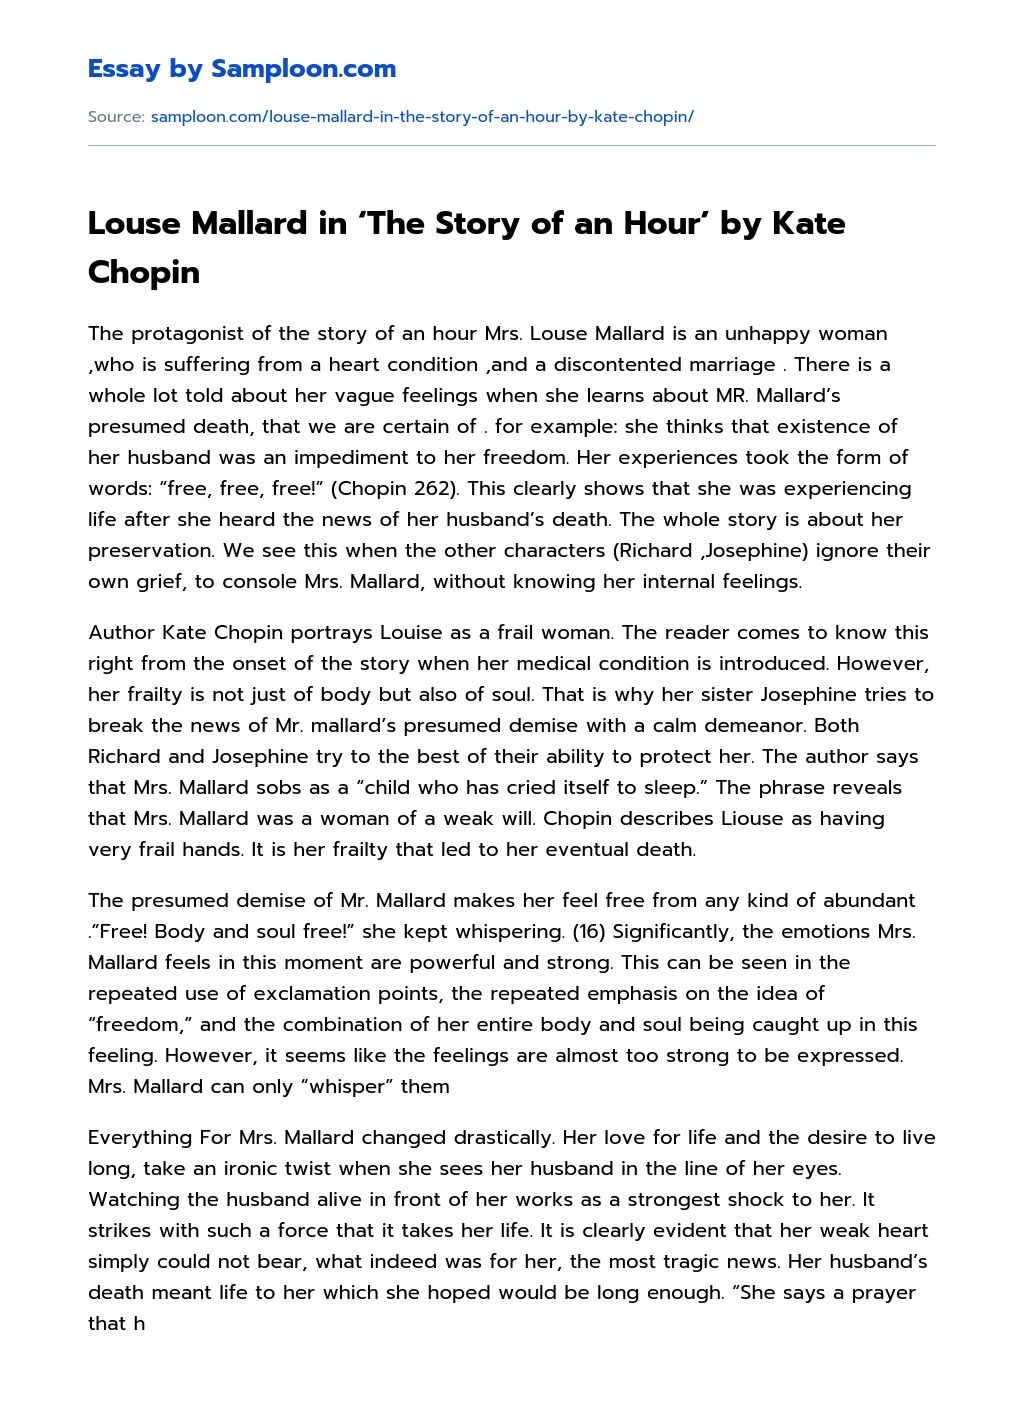 Louse Mallard in ‘The Story of an Hour’ by Kate Chopin essay